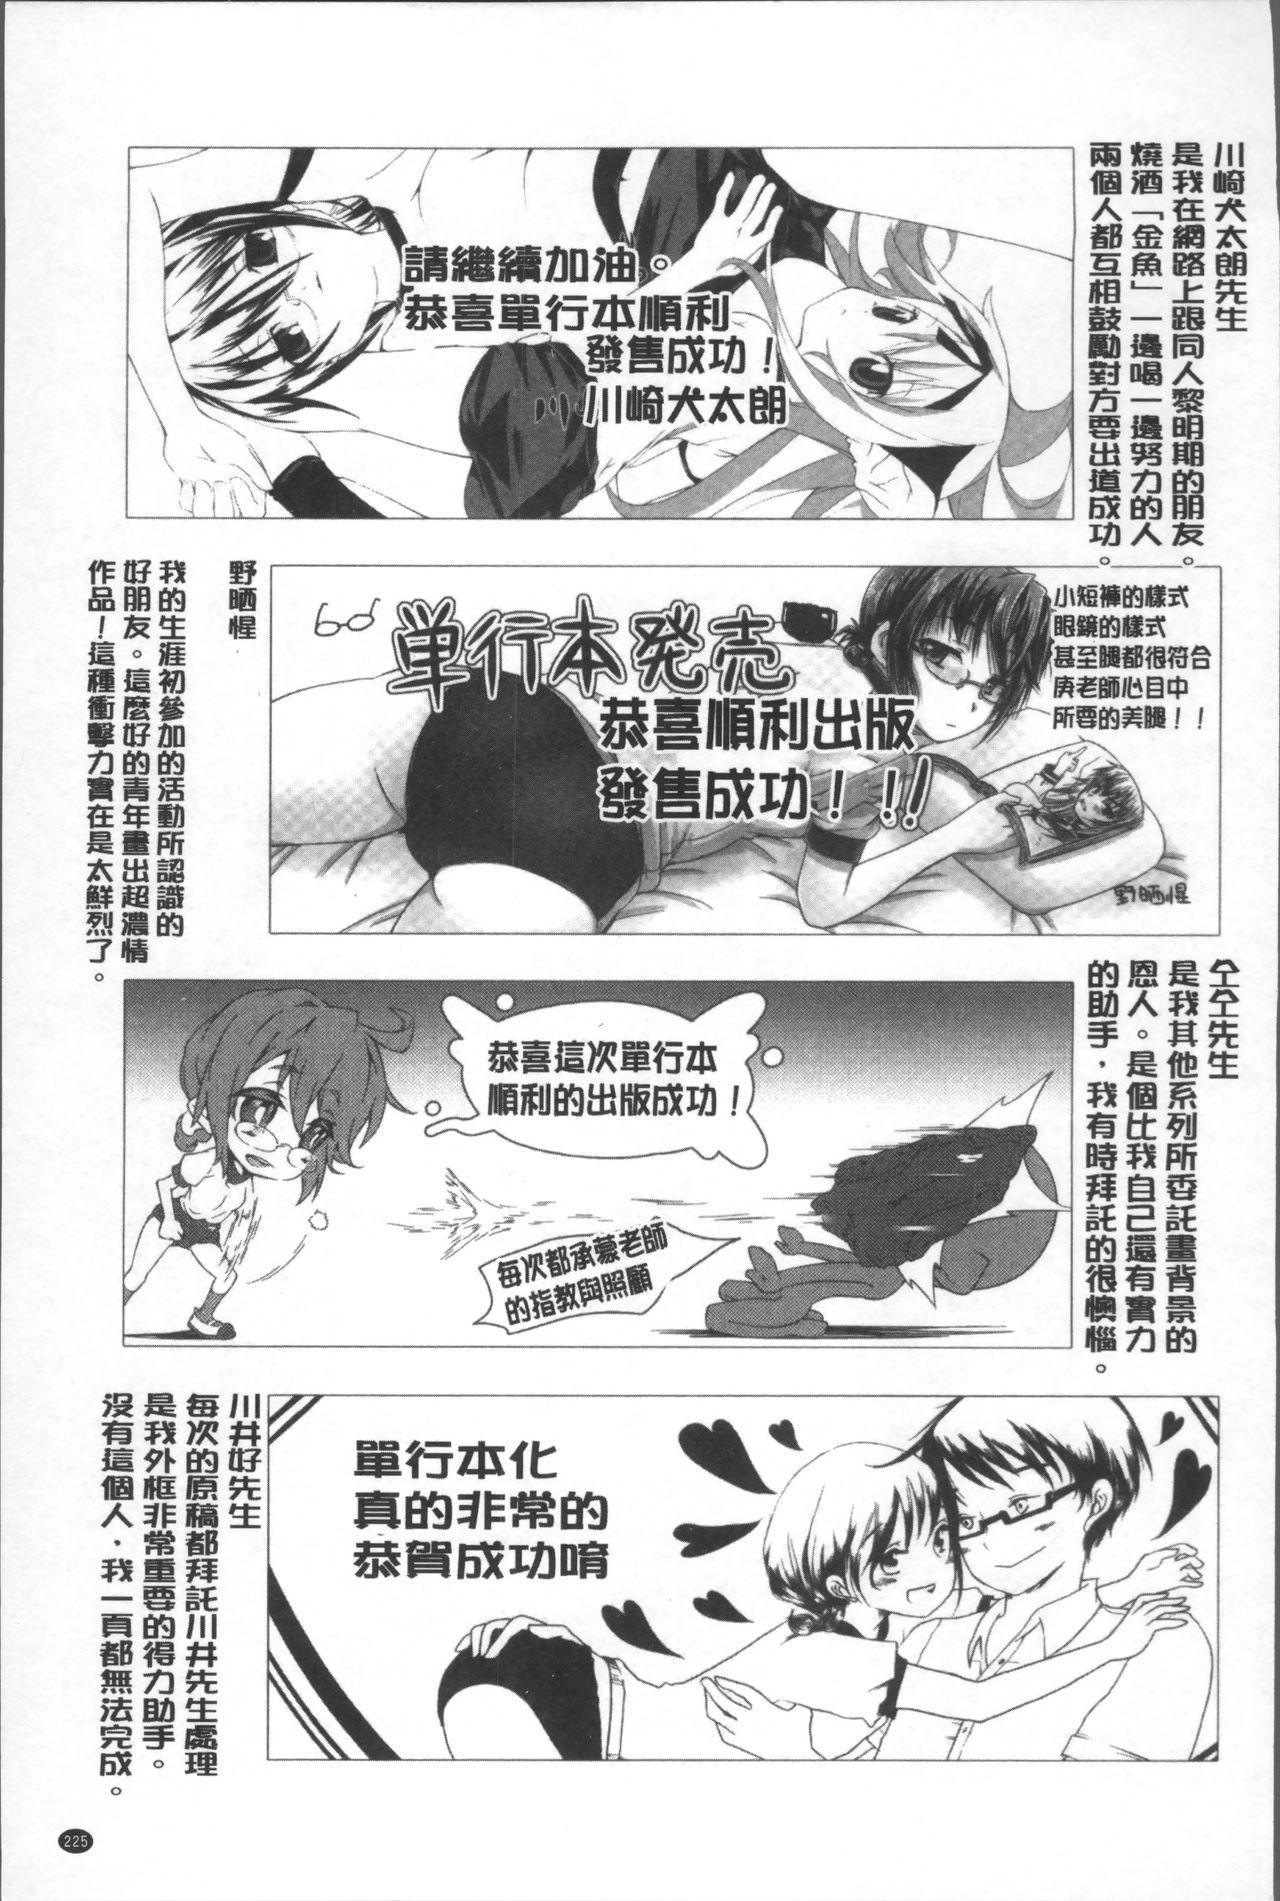 Bloomers to Megane de Inkou!! - Illicit Intercourse with Bloomers & Glasses!! 234